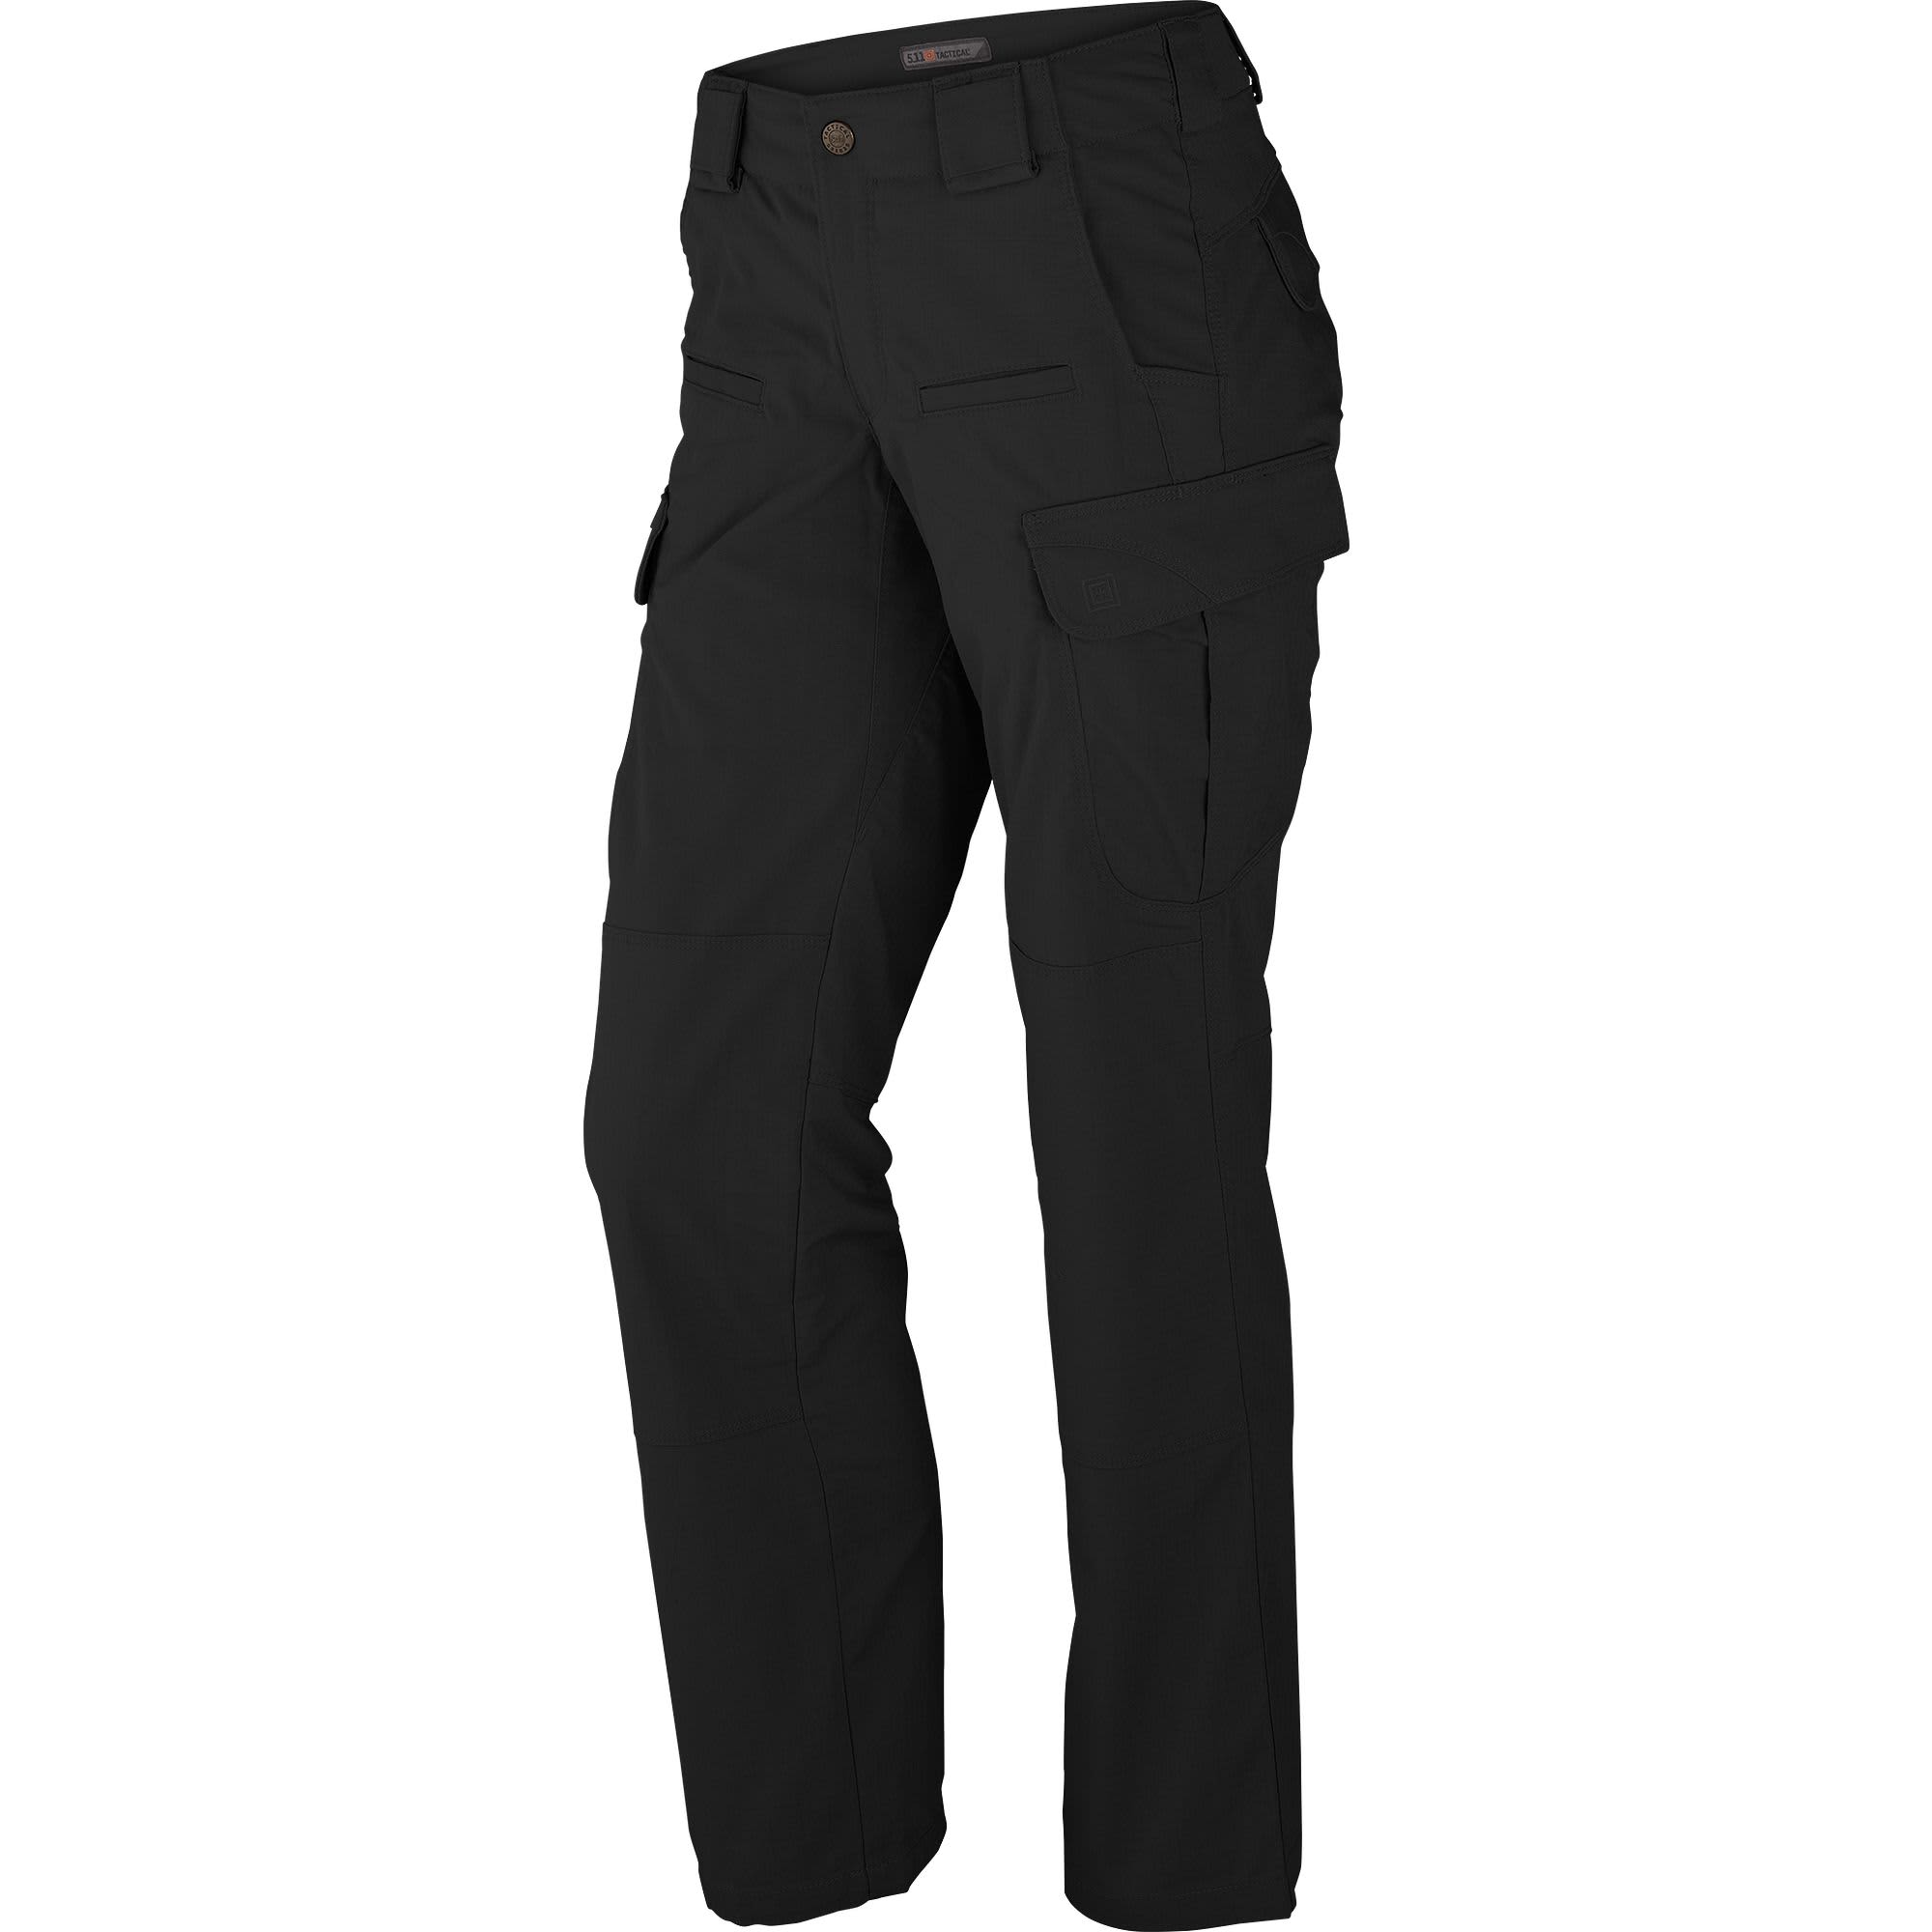 5.11® Tactical Women’s Stryke™ Pants with Flex-Tac® | Cabela's Canada